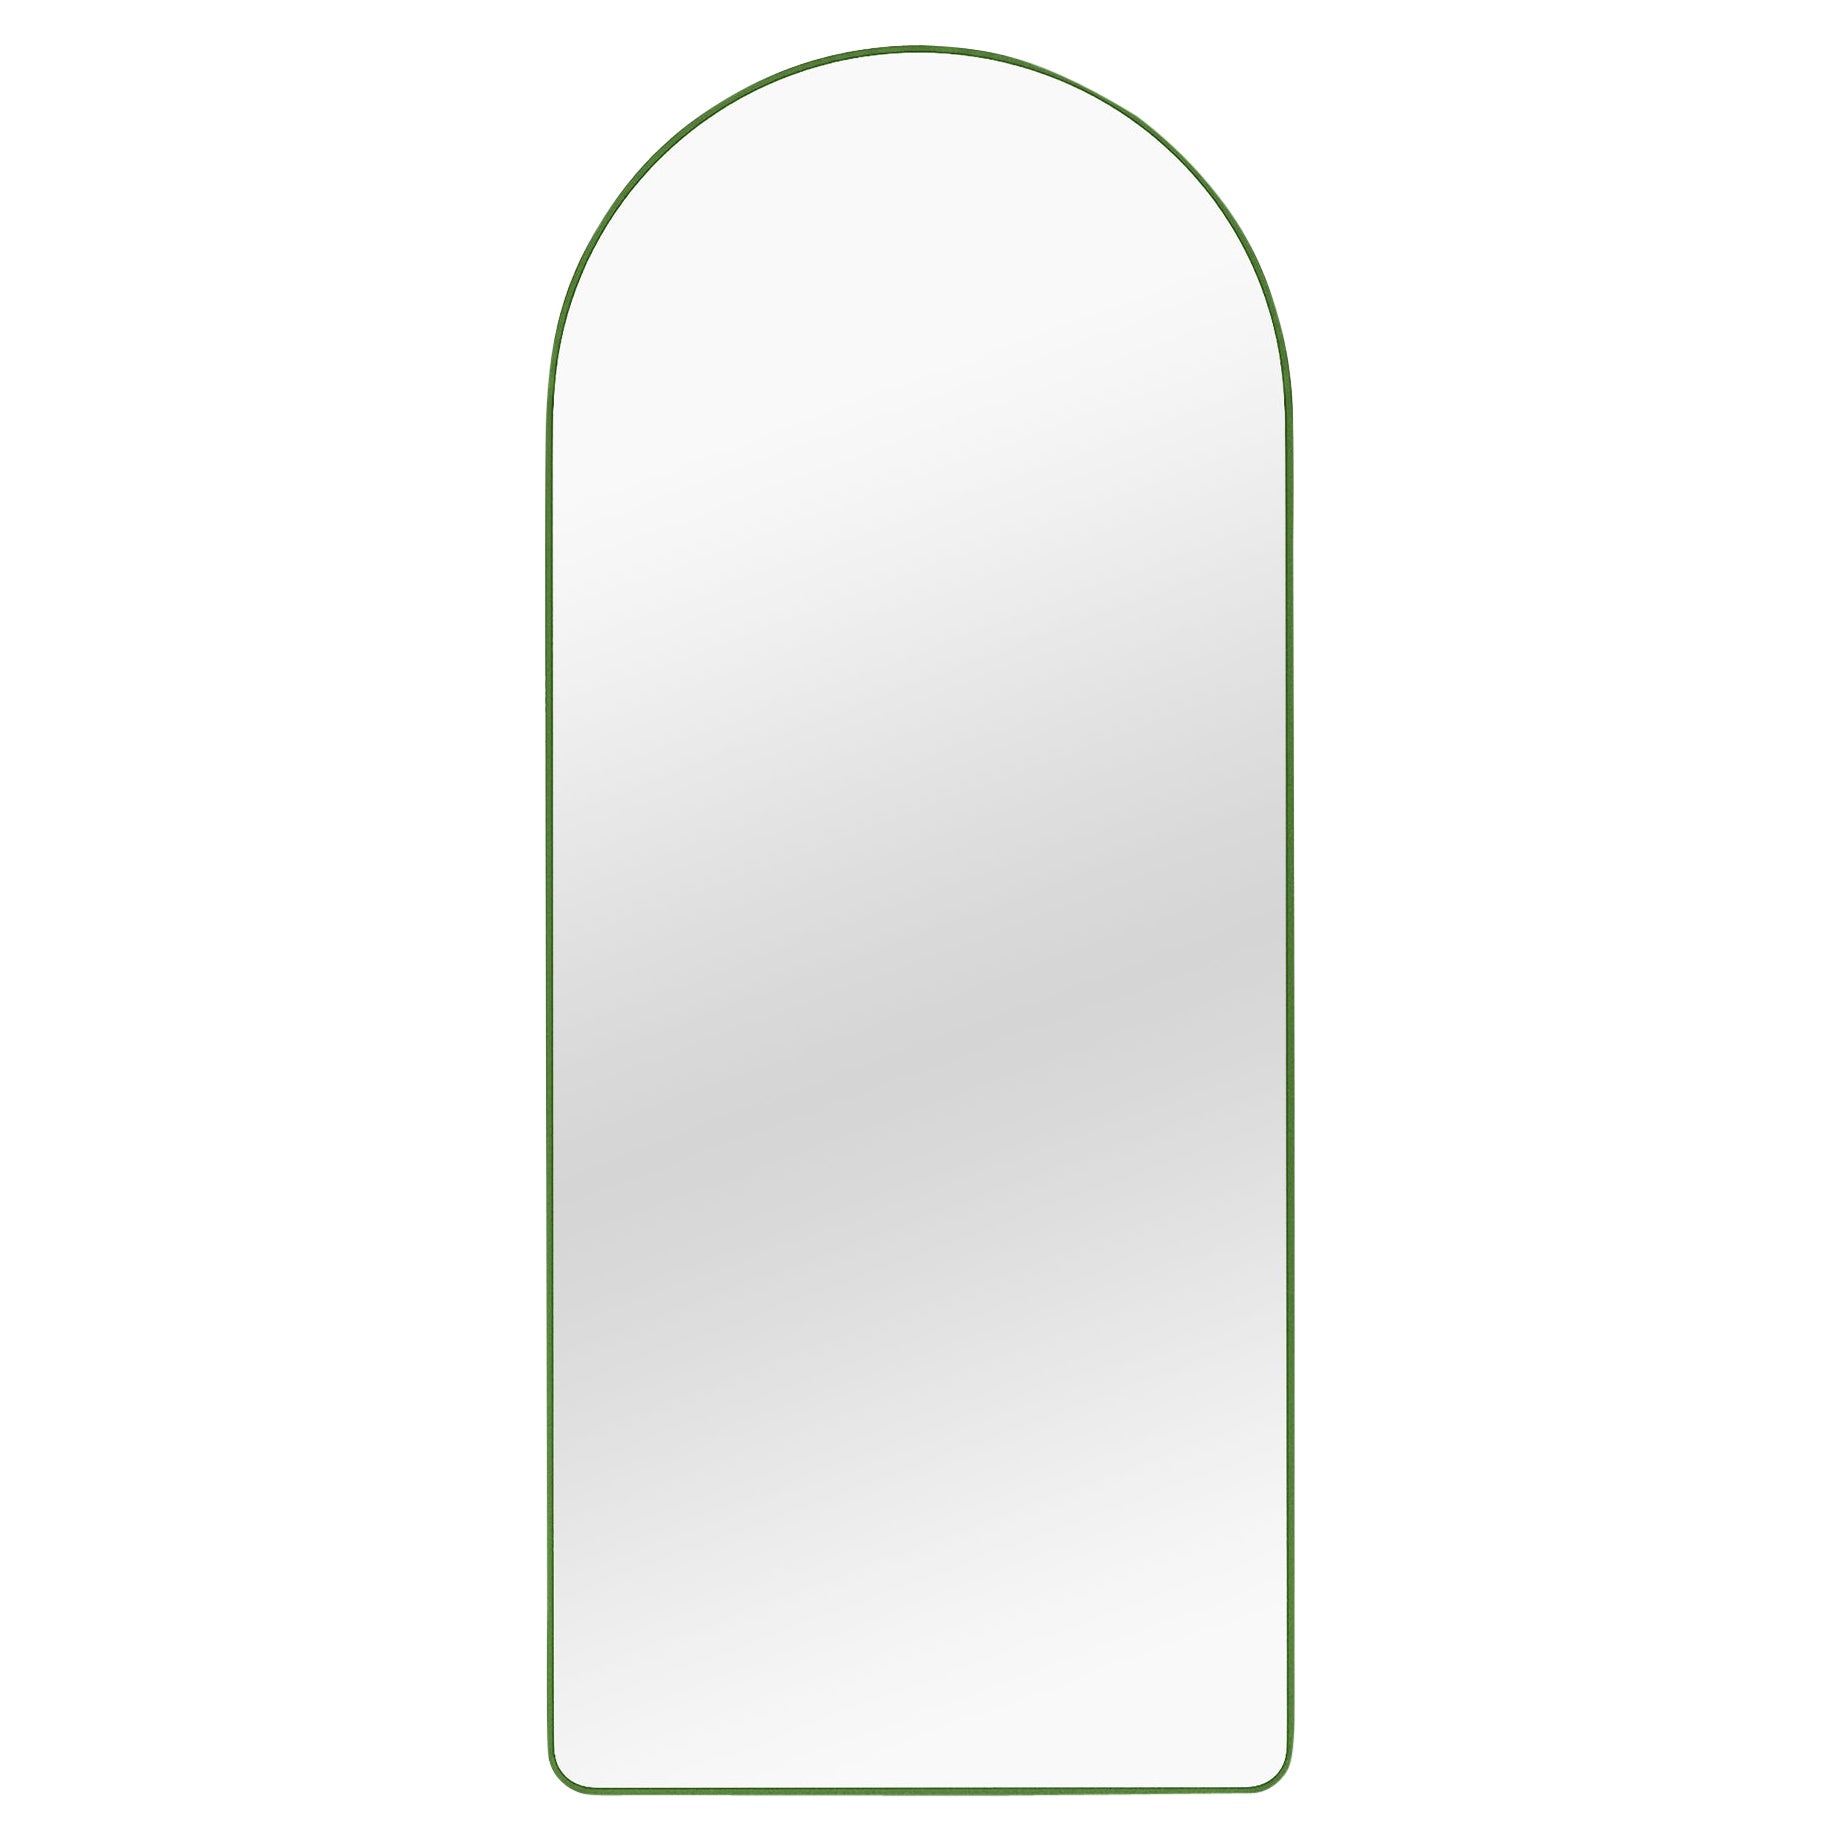 Contemporary Mirror 'Loveself 01' by Oitoproducts, Green Frame For Sale